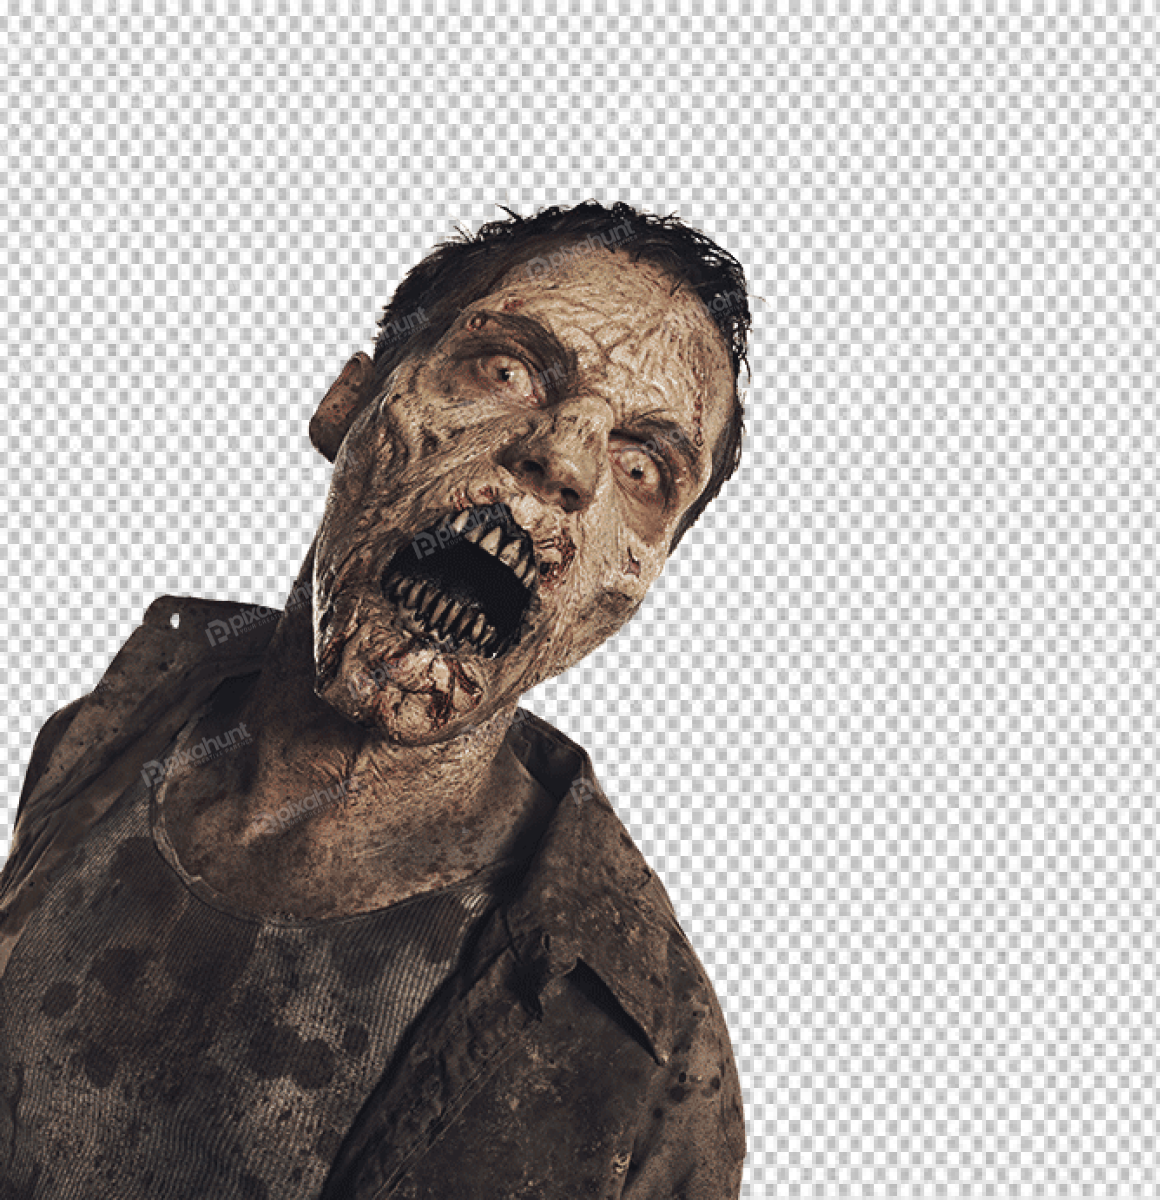 Free Premium PNG The zombie is in a position where he is looking at the camera with his mouth open and his teeth bared